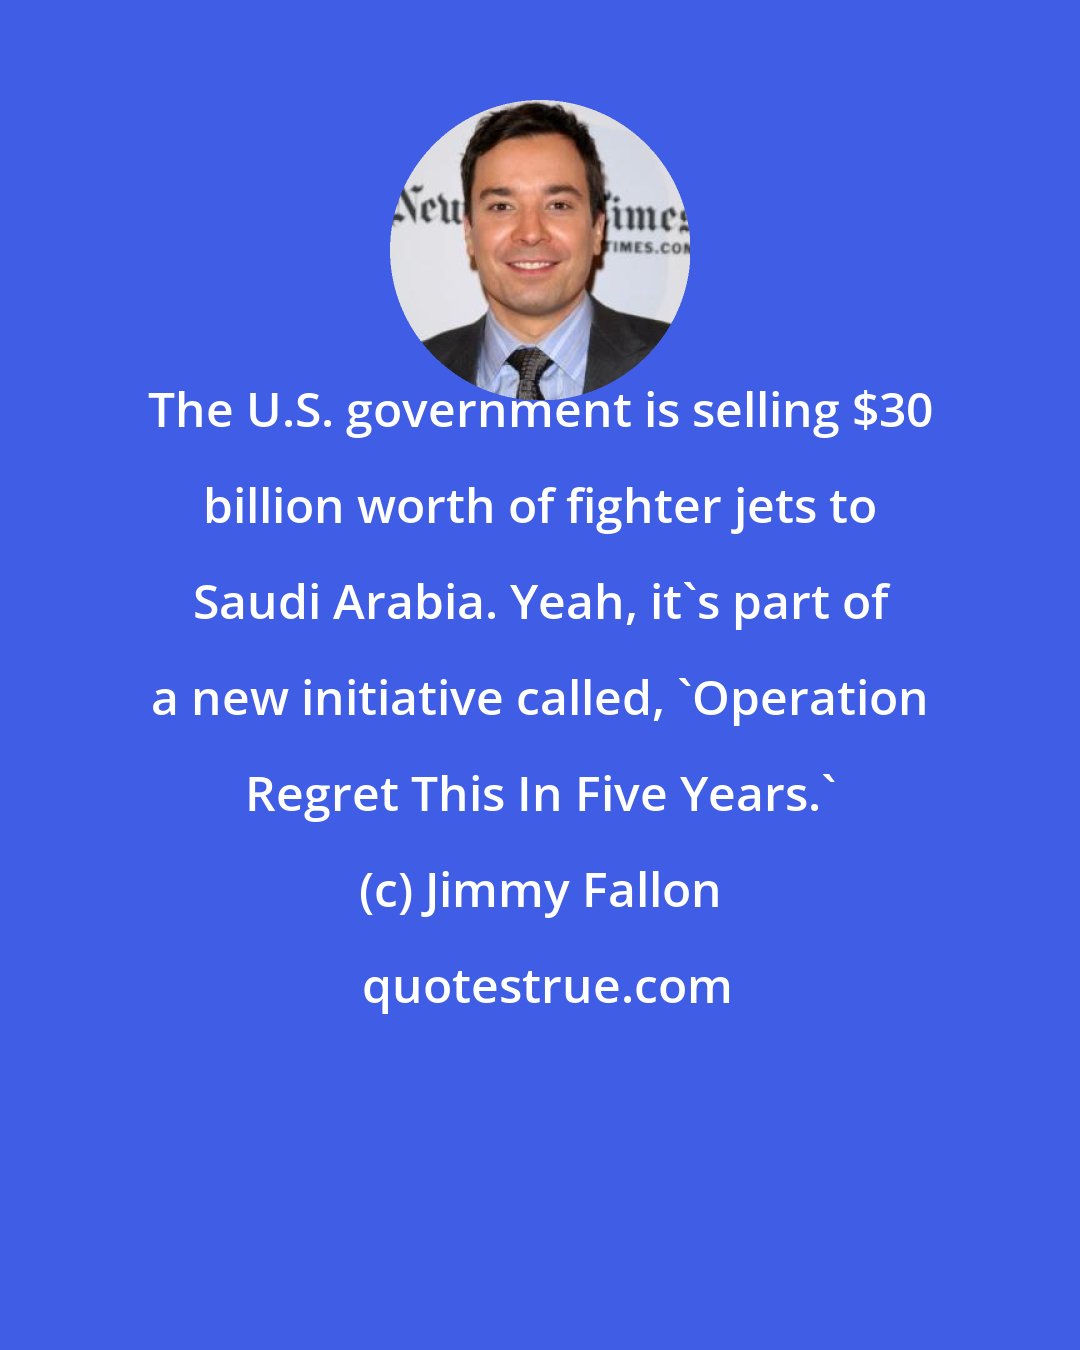 Jimmy Fallon: The U.S. government is selling $30 billion worth of fighter jets to Saudi Arabia. Yeah, it's part of a new initiative called, 'Operation Regret This In Five Years.'